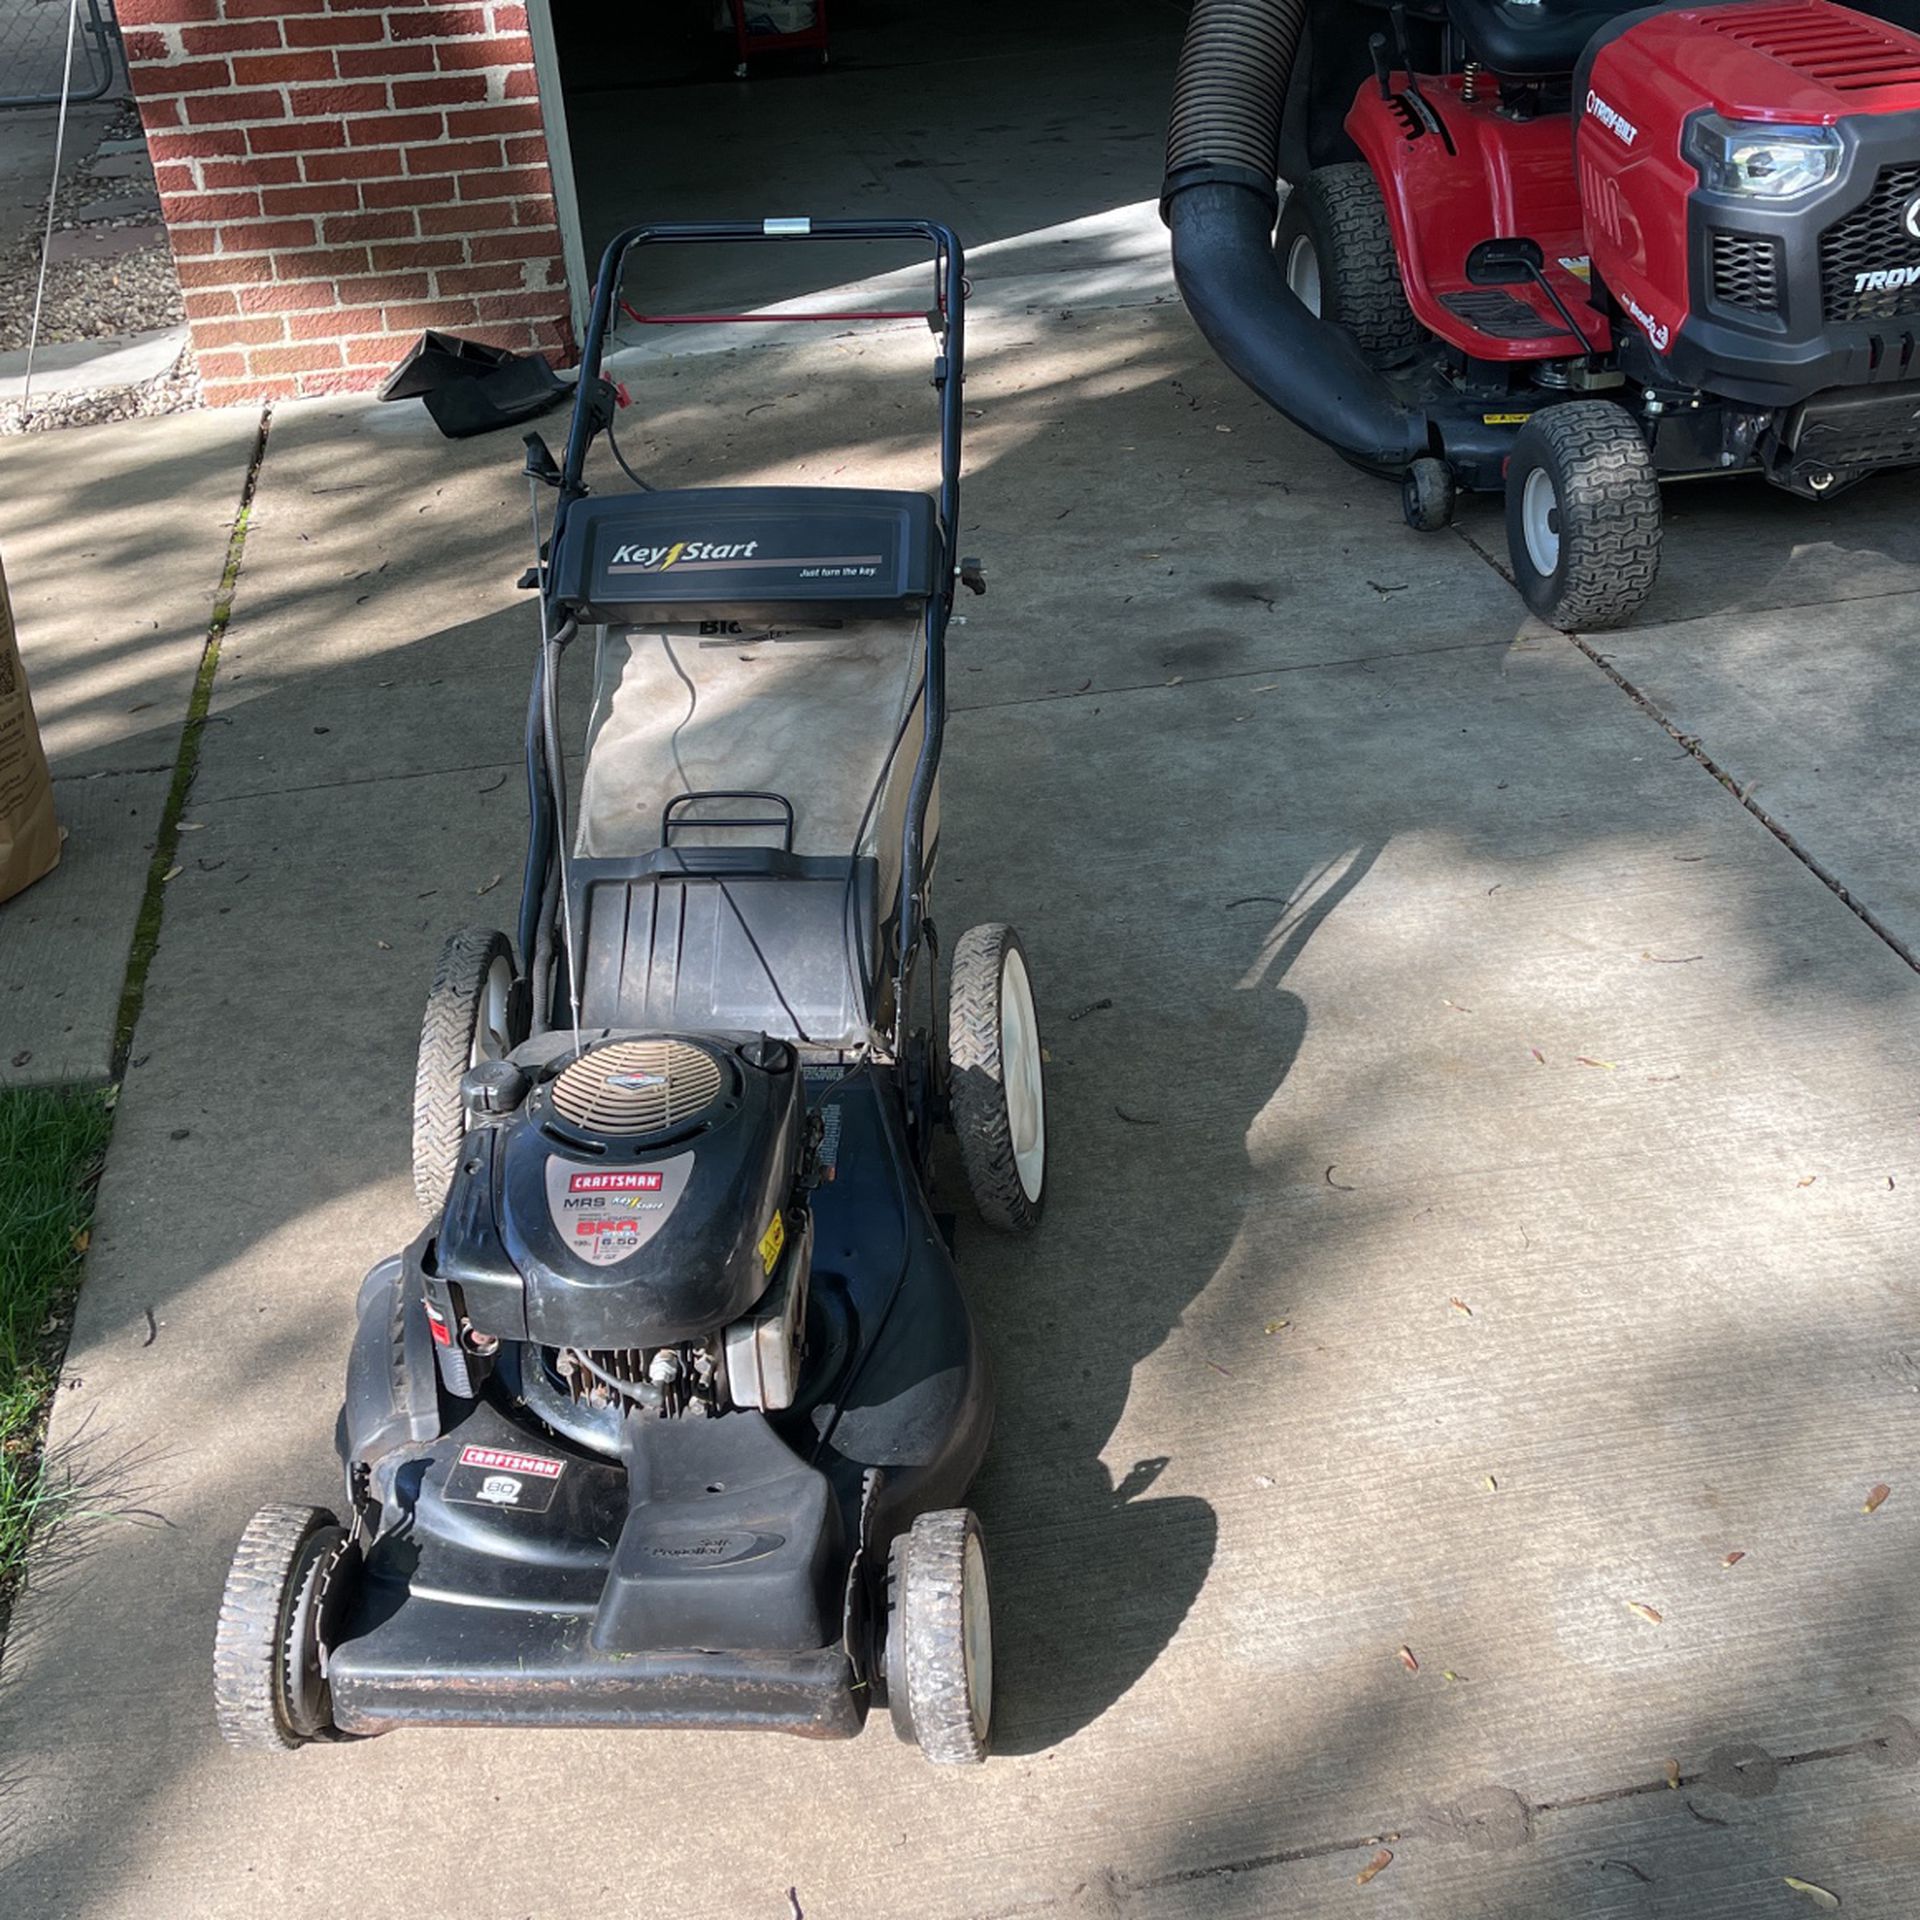 Electric Start Self Propelled Lawnmower With Bag